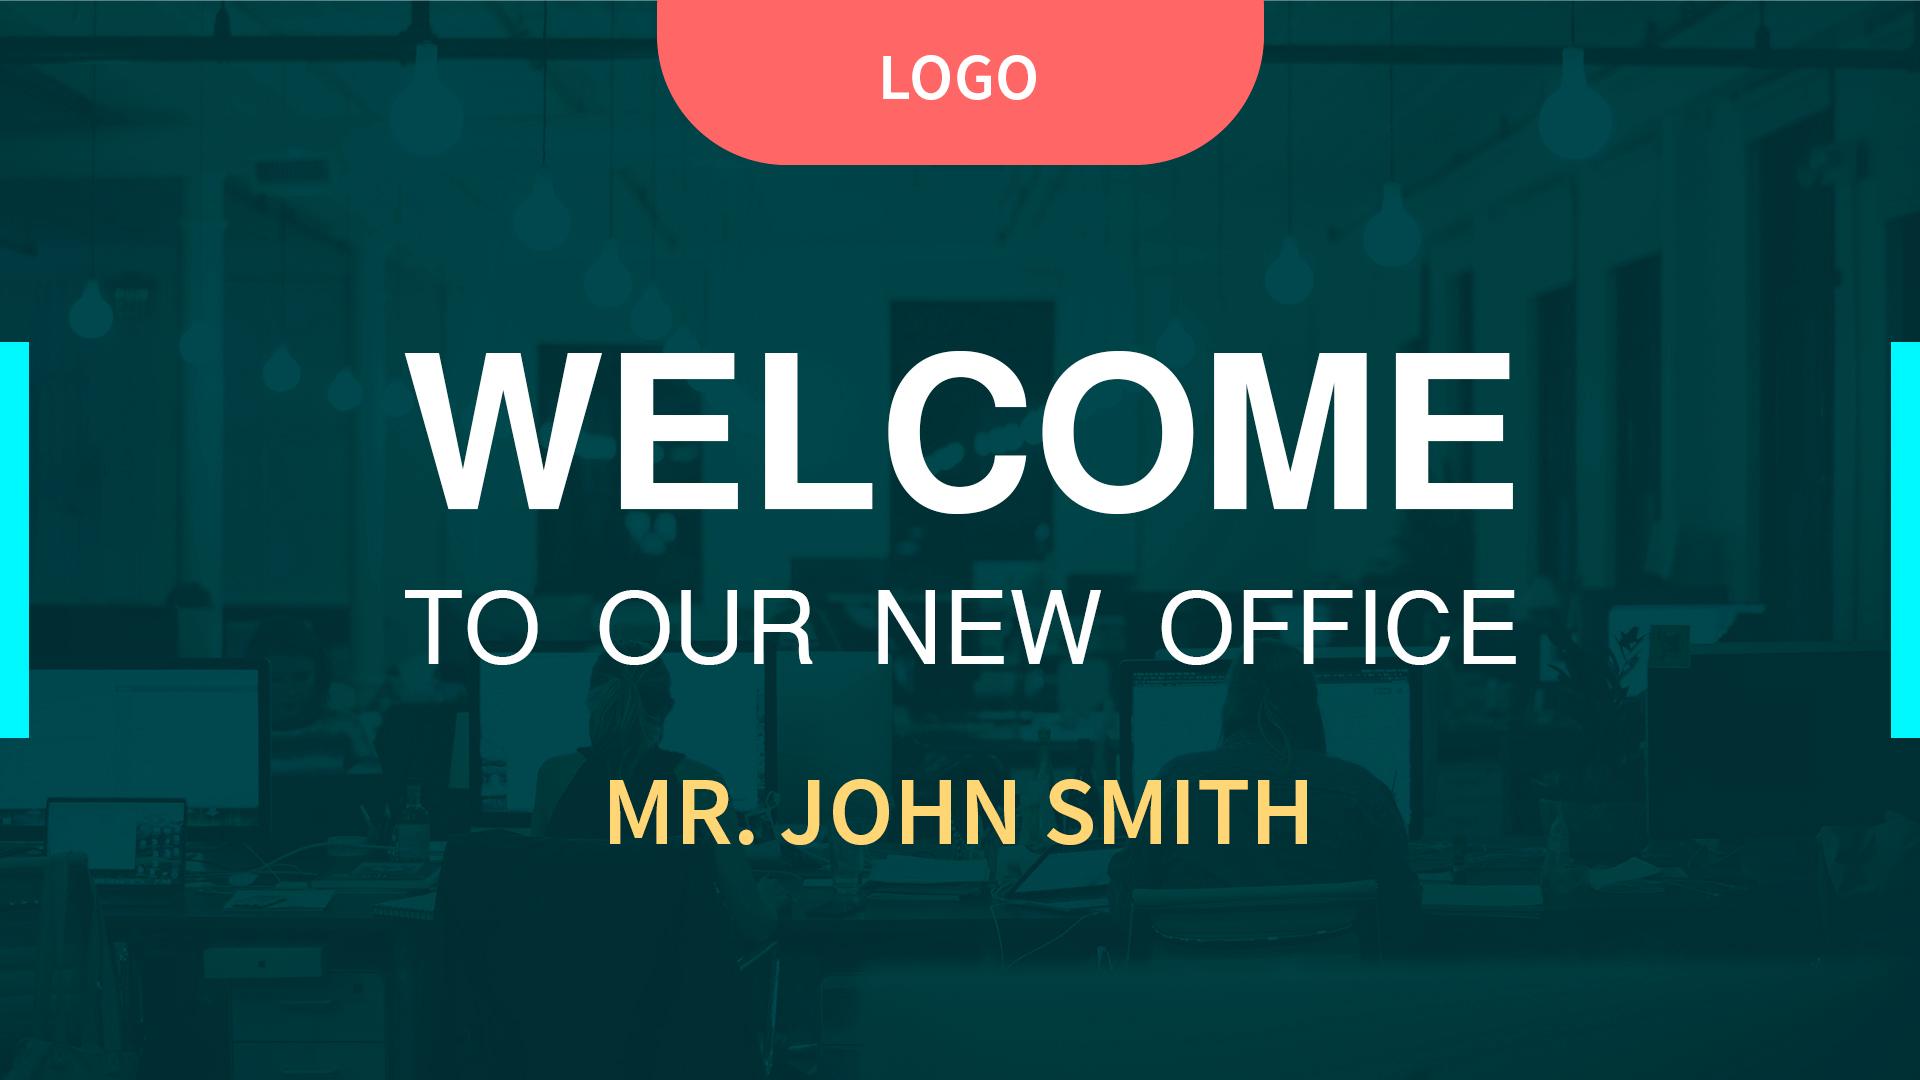 welcome to our new office signage template